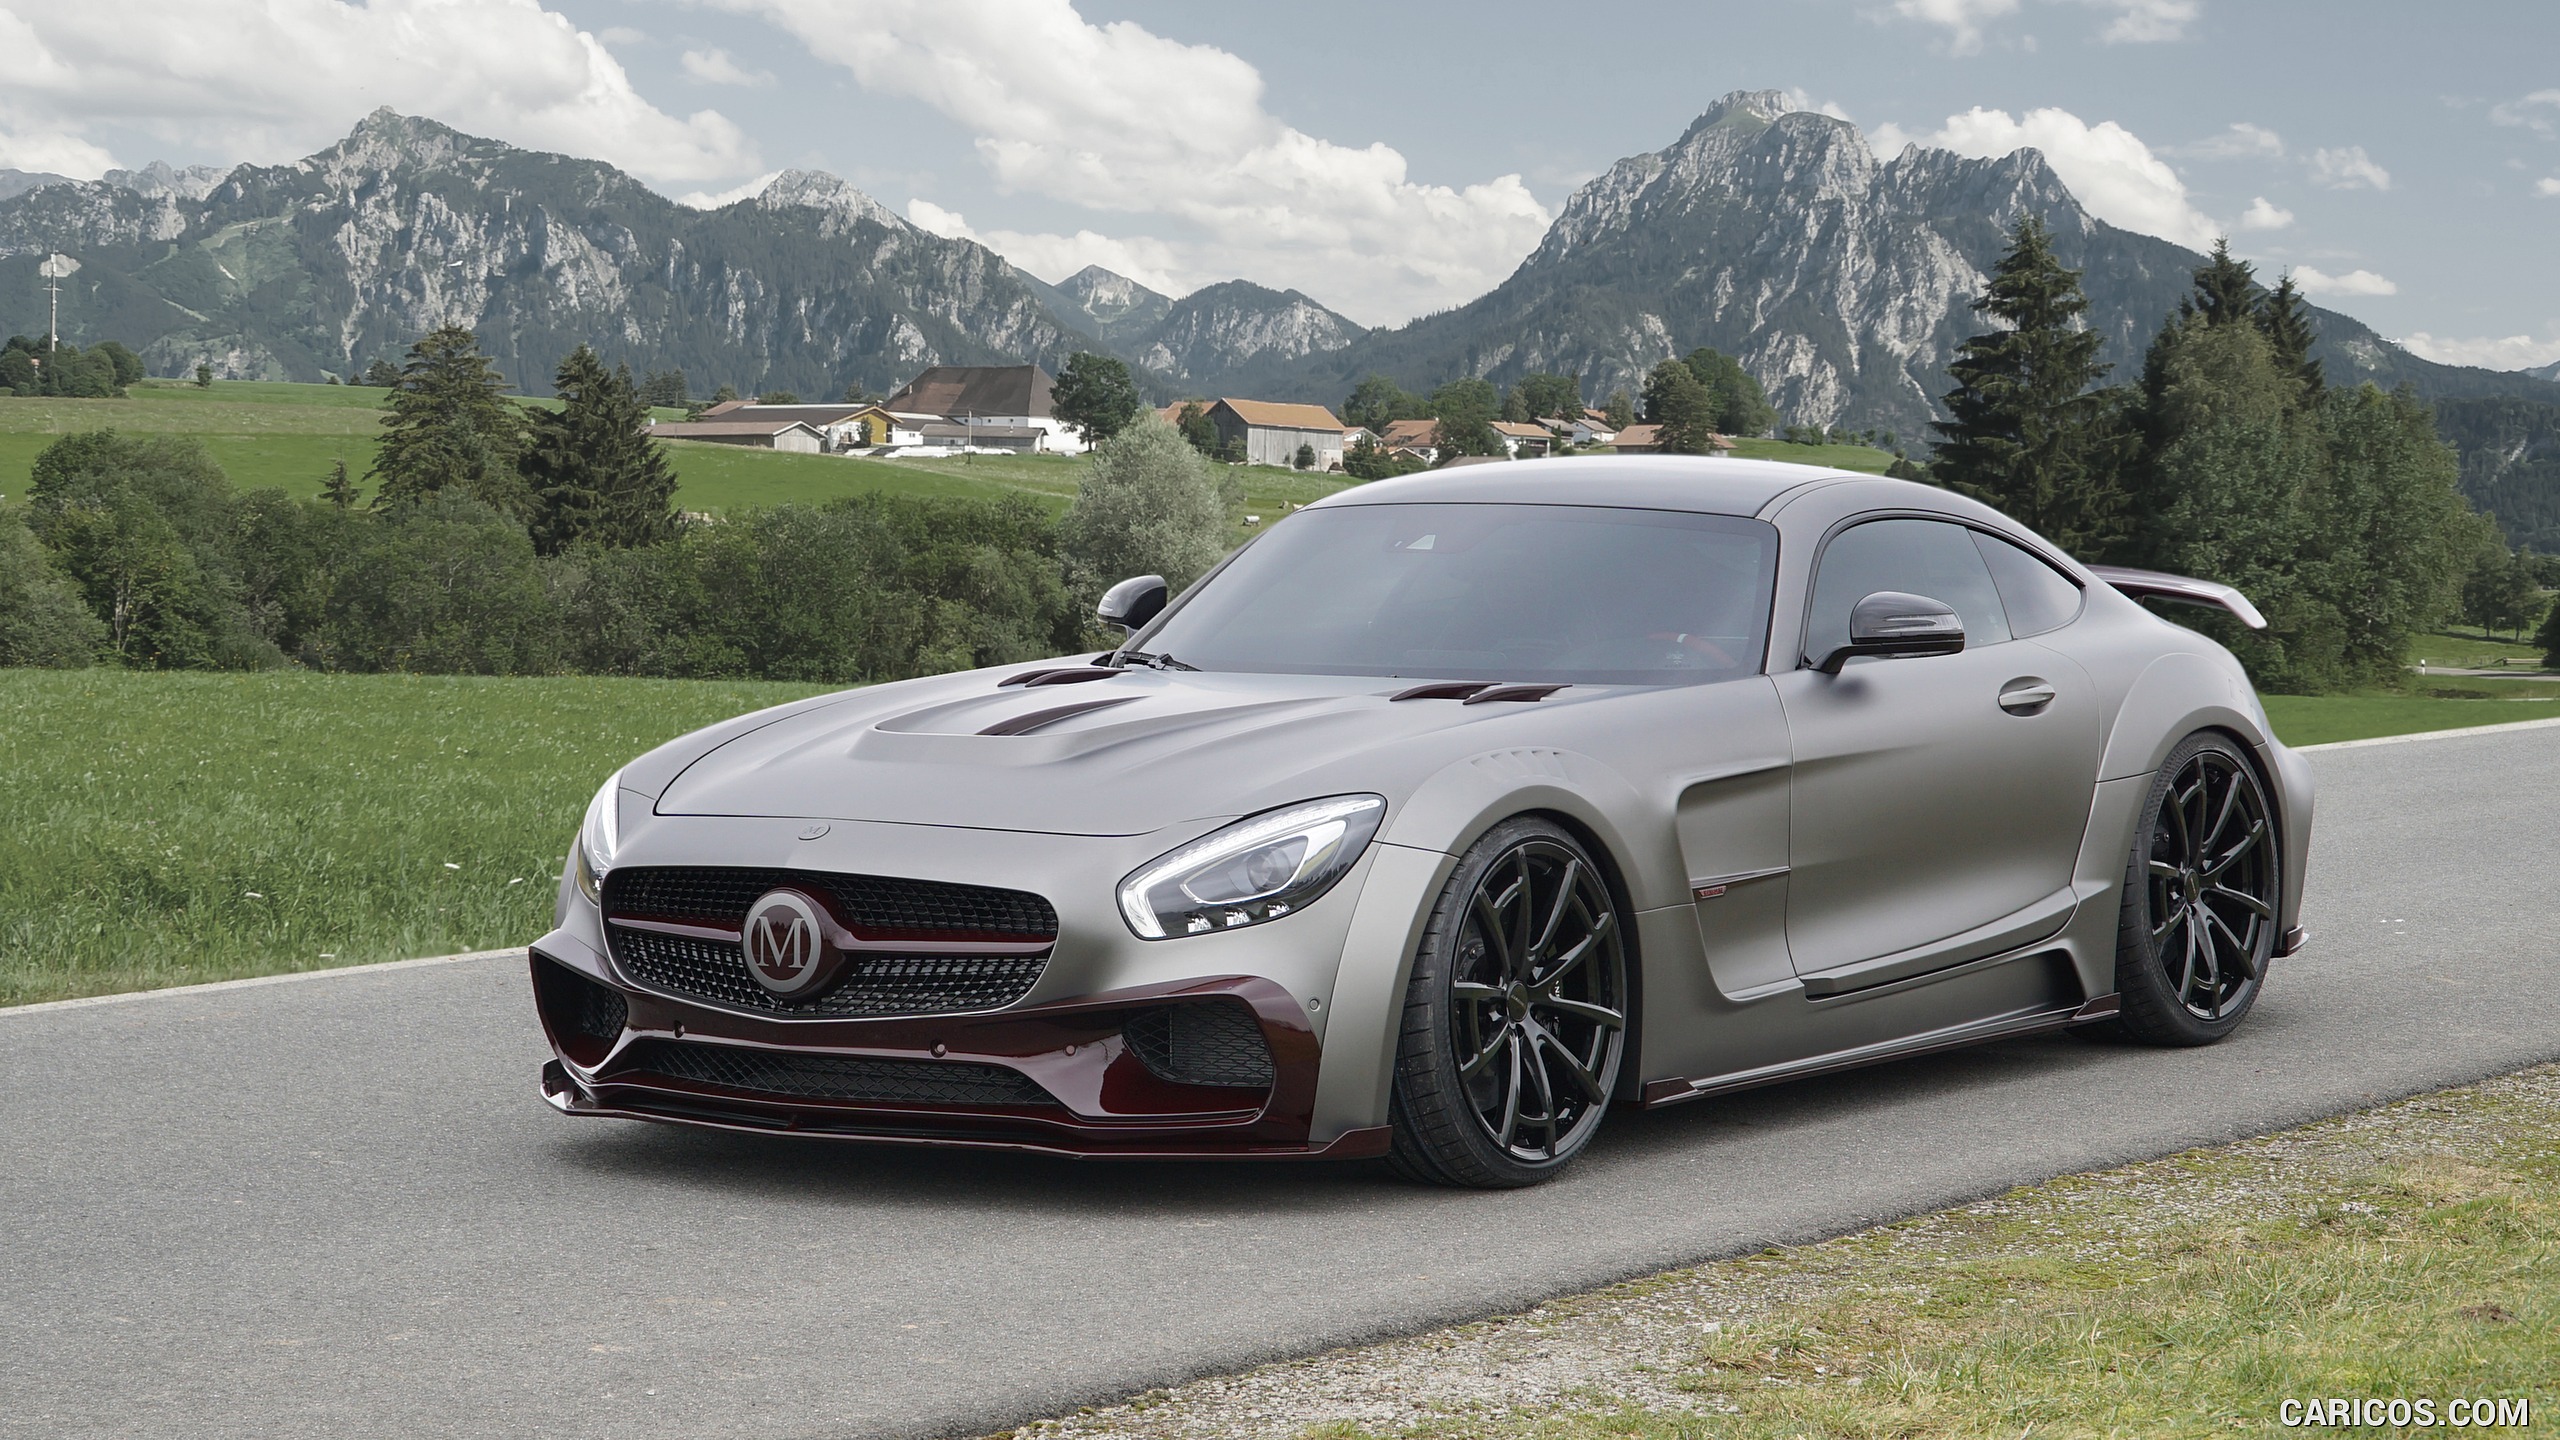 2016 MANSORY Mercedes-AMG GT S - Front, #3 of 10